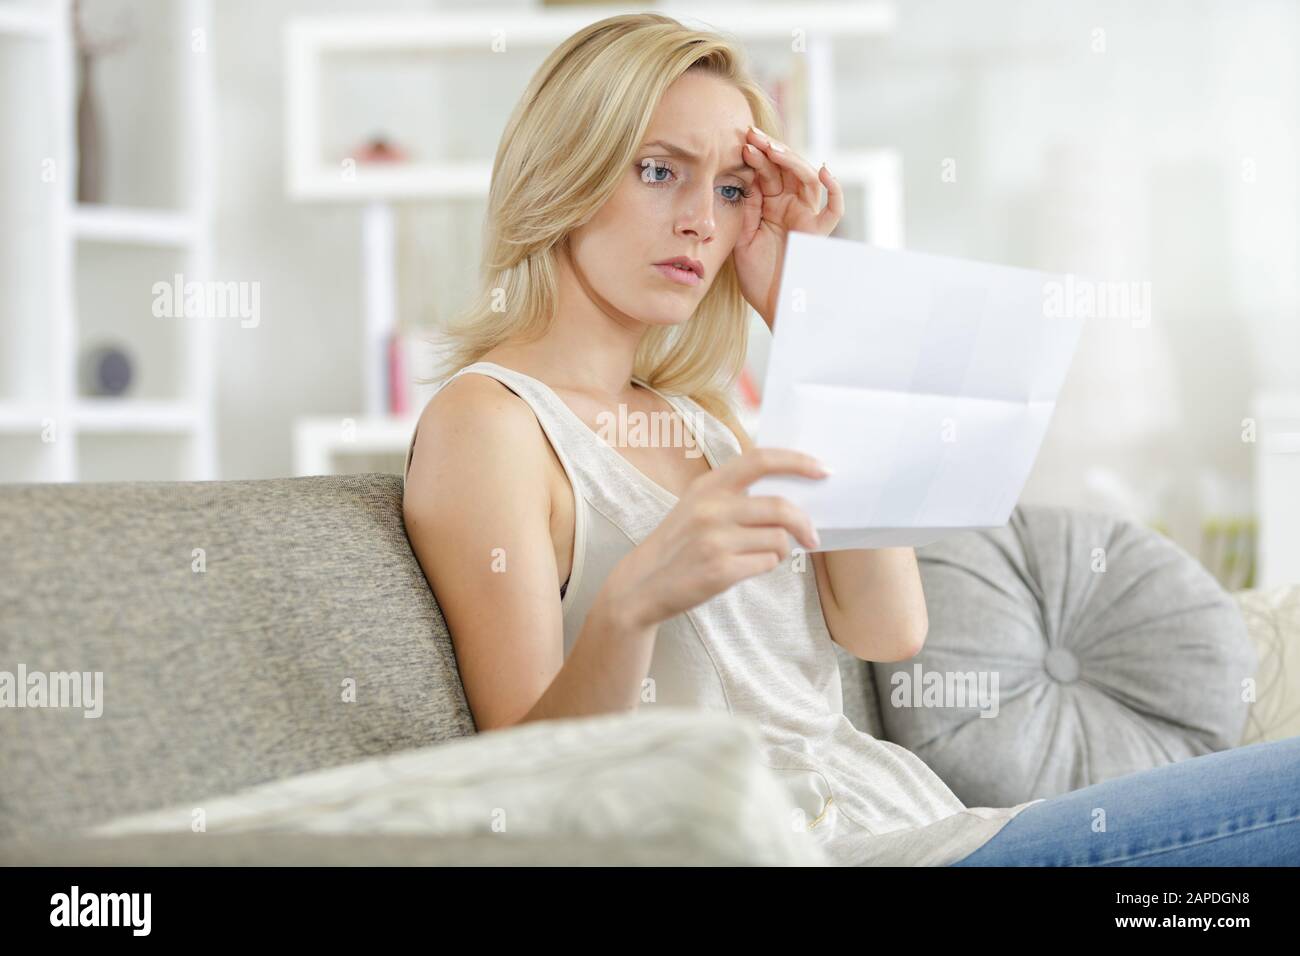 young attractive woman received company upsetting notice letter Stock Photo